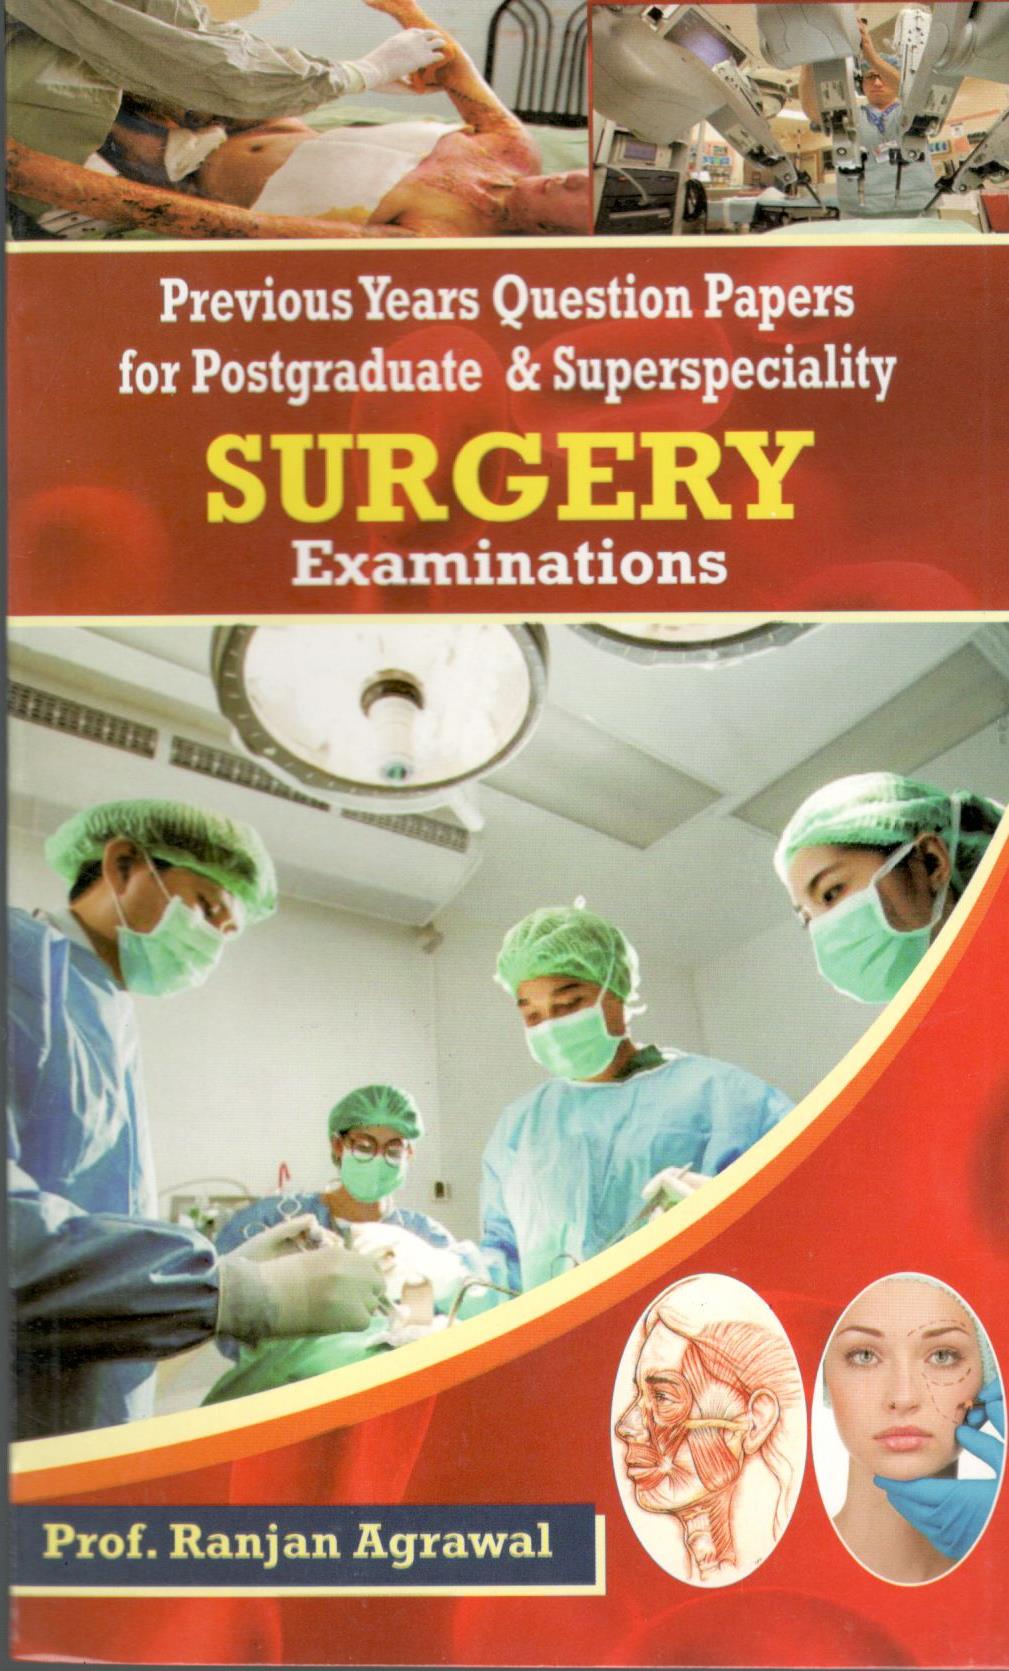 Previous Years Question Papers For Postgraduate & Superspeciality Surgery Examinations